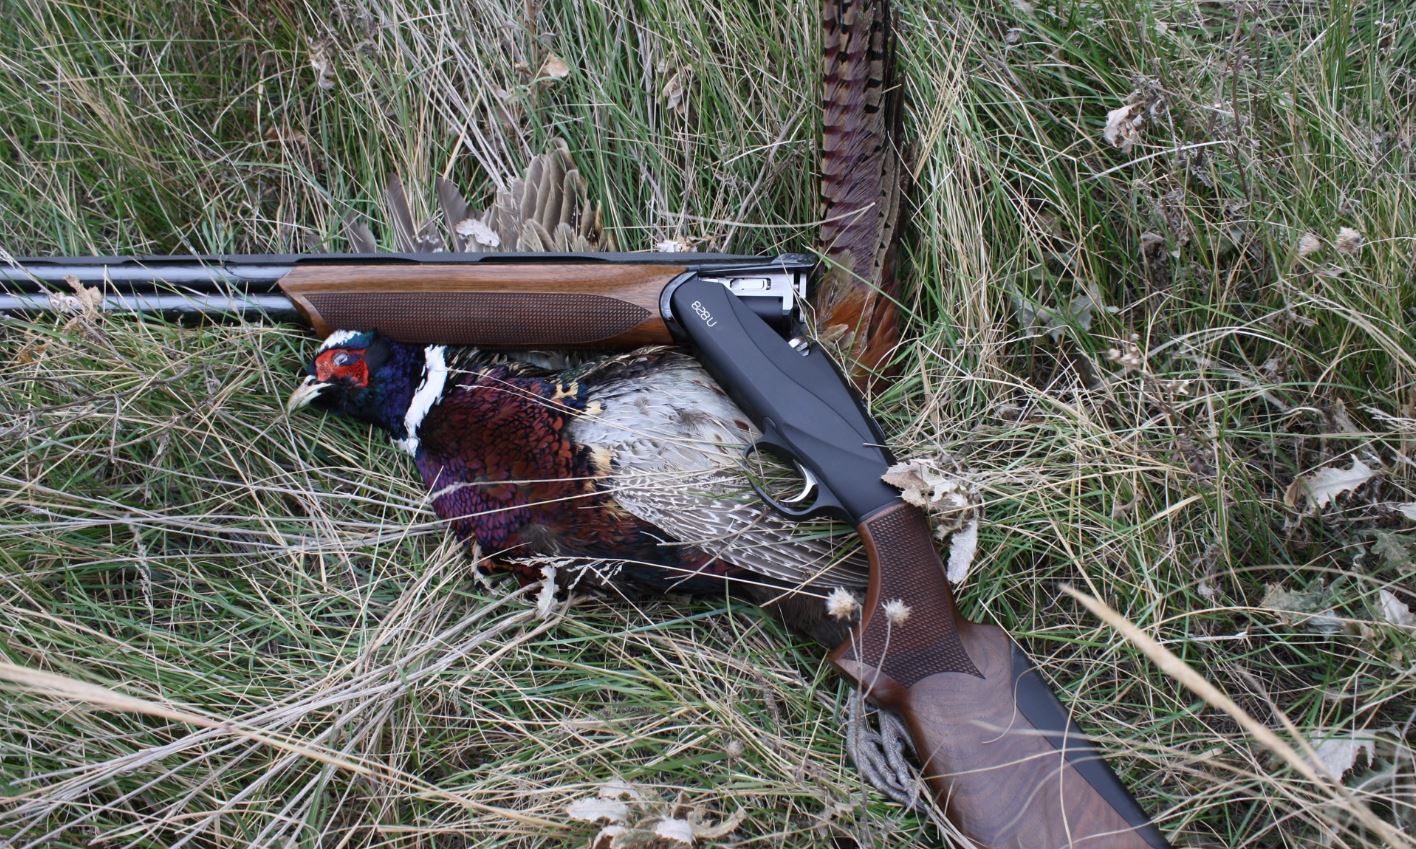 The Benelli 828U and a South Dakota rooster.